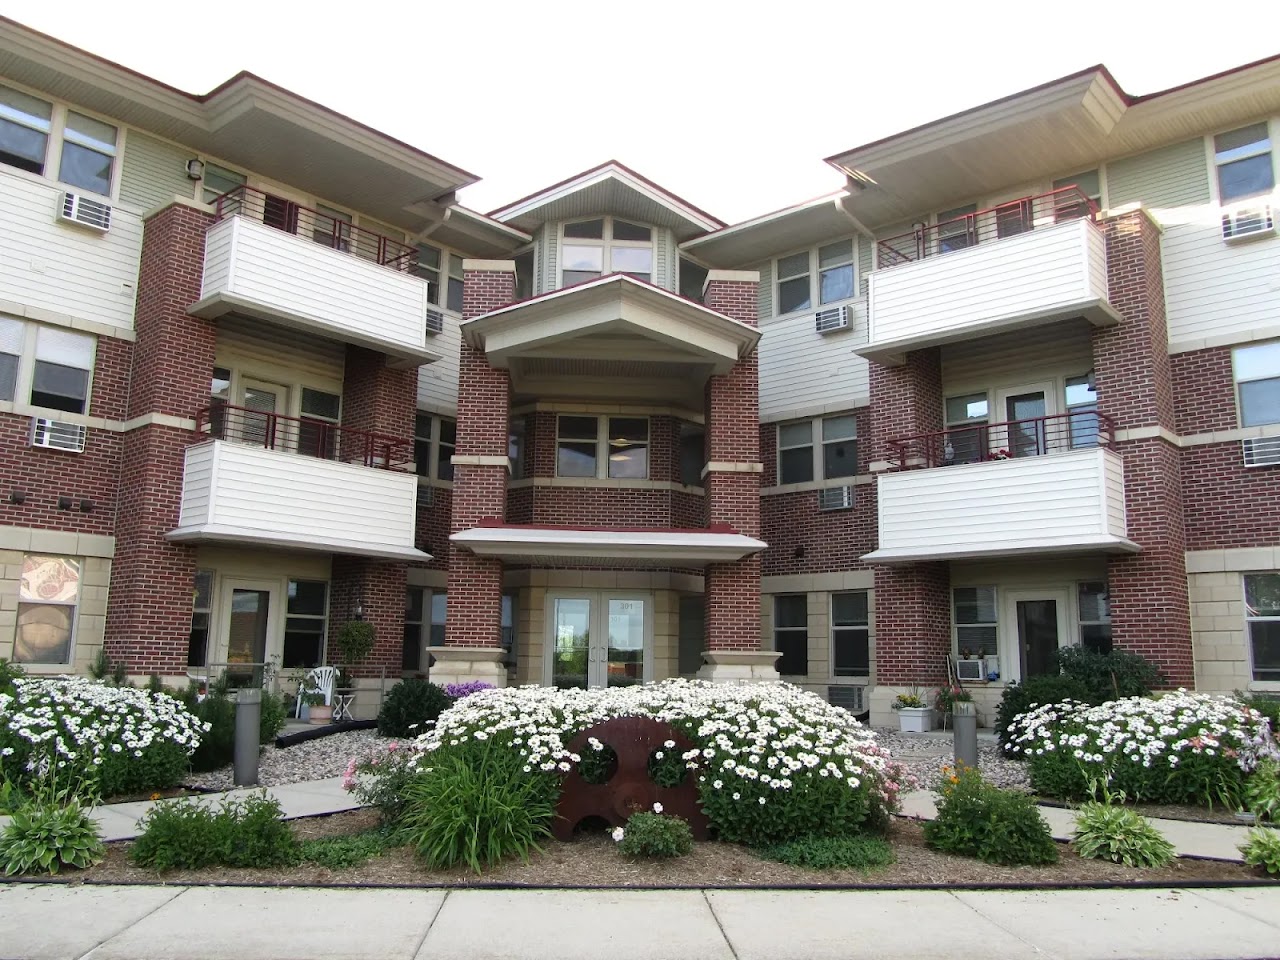 Photo of CANNERY ROW SENIOR APTS. Affordable housing located at 301 E THIRD ST WAUNAKEE, WI 53597